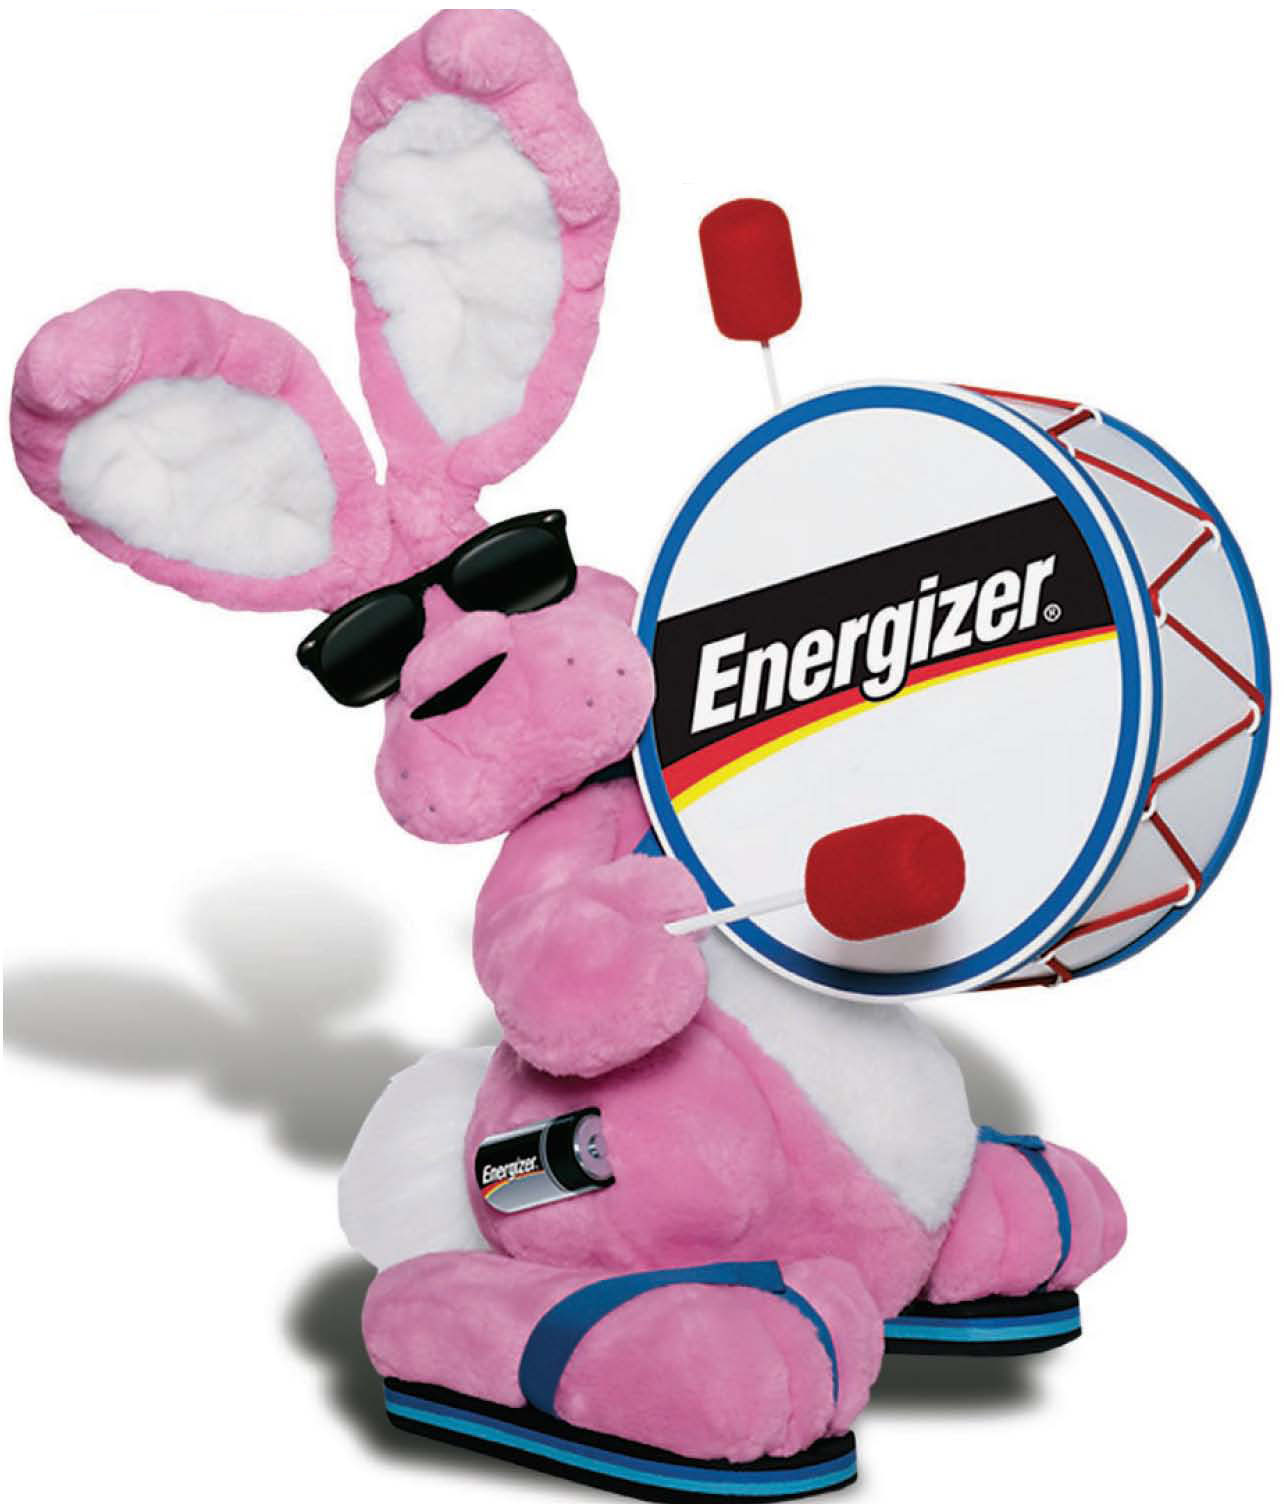 Marching-into-history-At-20-Energizer-Bunny-is-an-icon.jpg